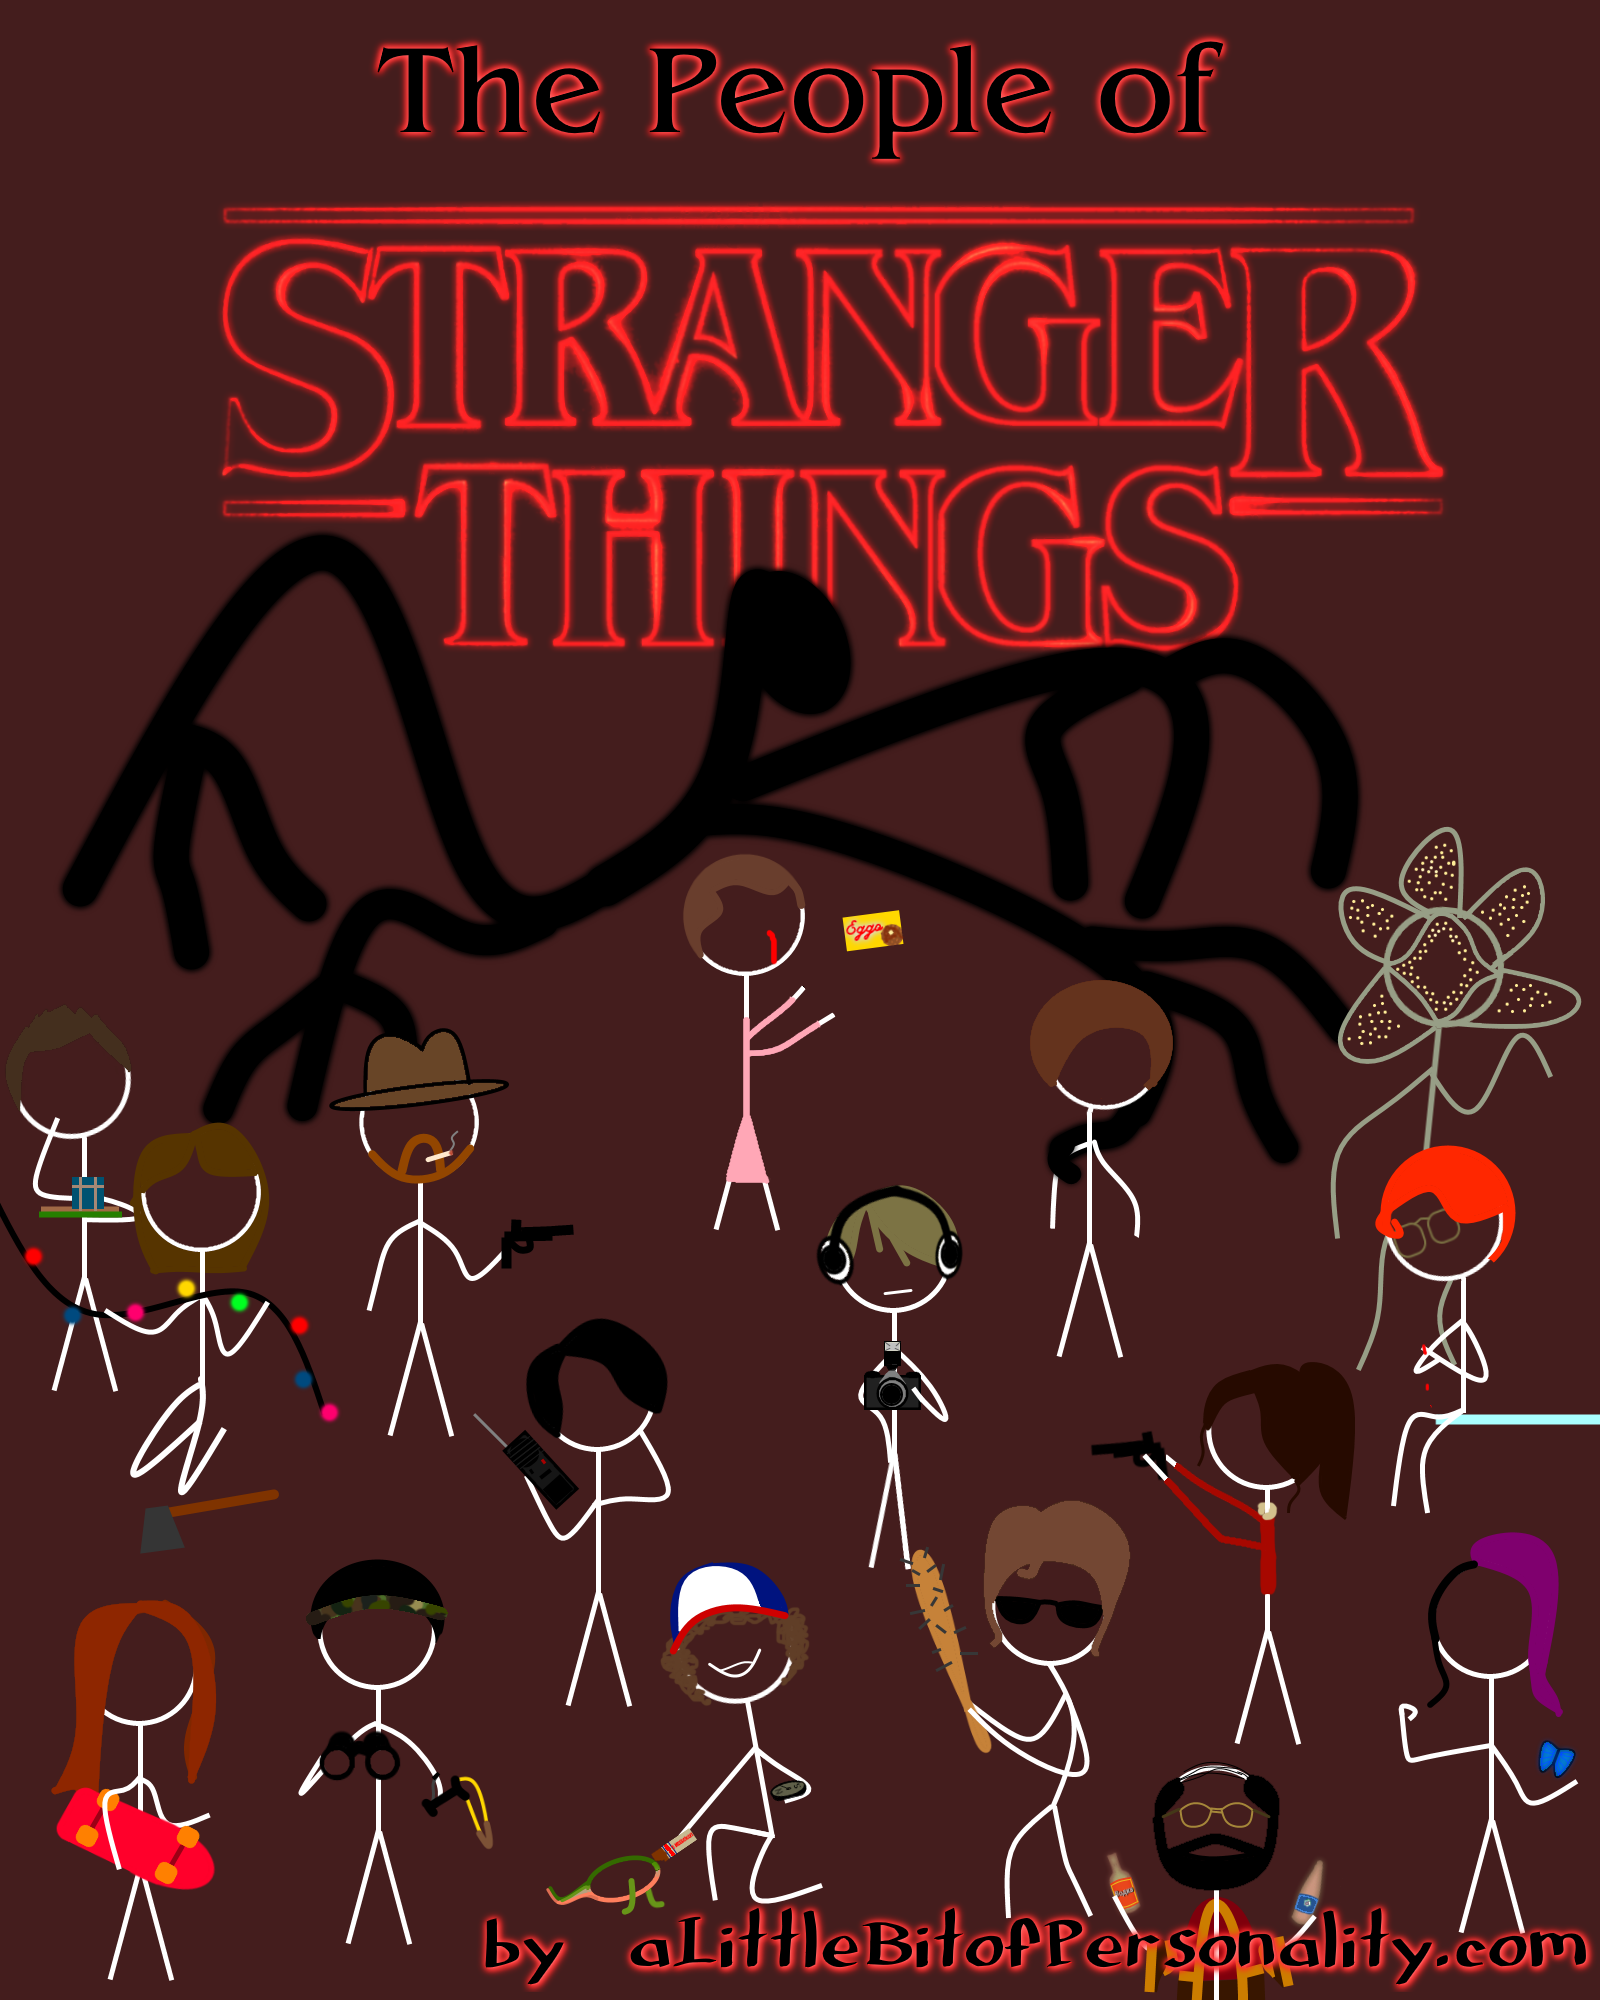 Stranger Things Role-Play - Everything Stranger Things: ST Memes Showing  1-26 of 26